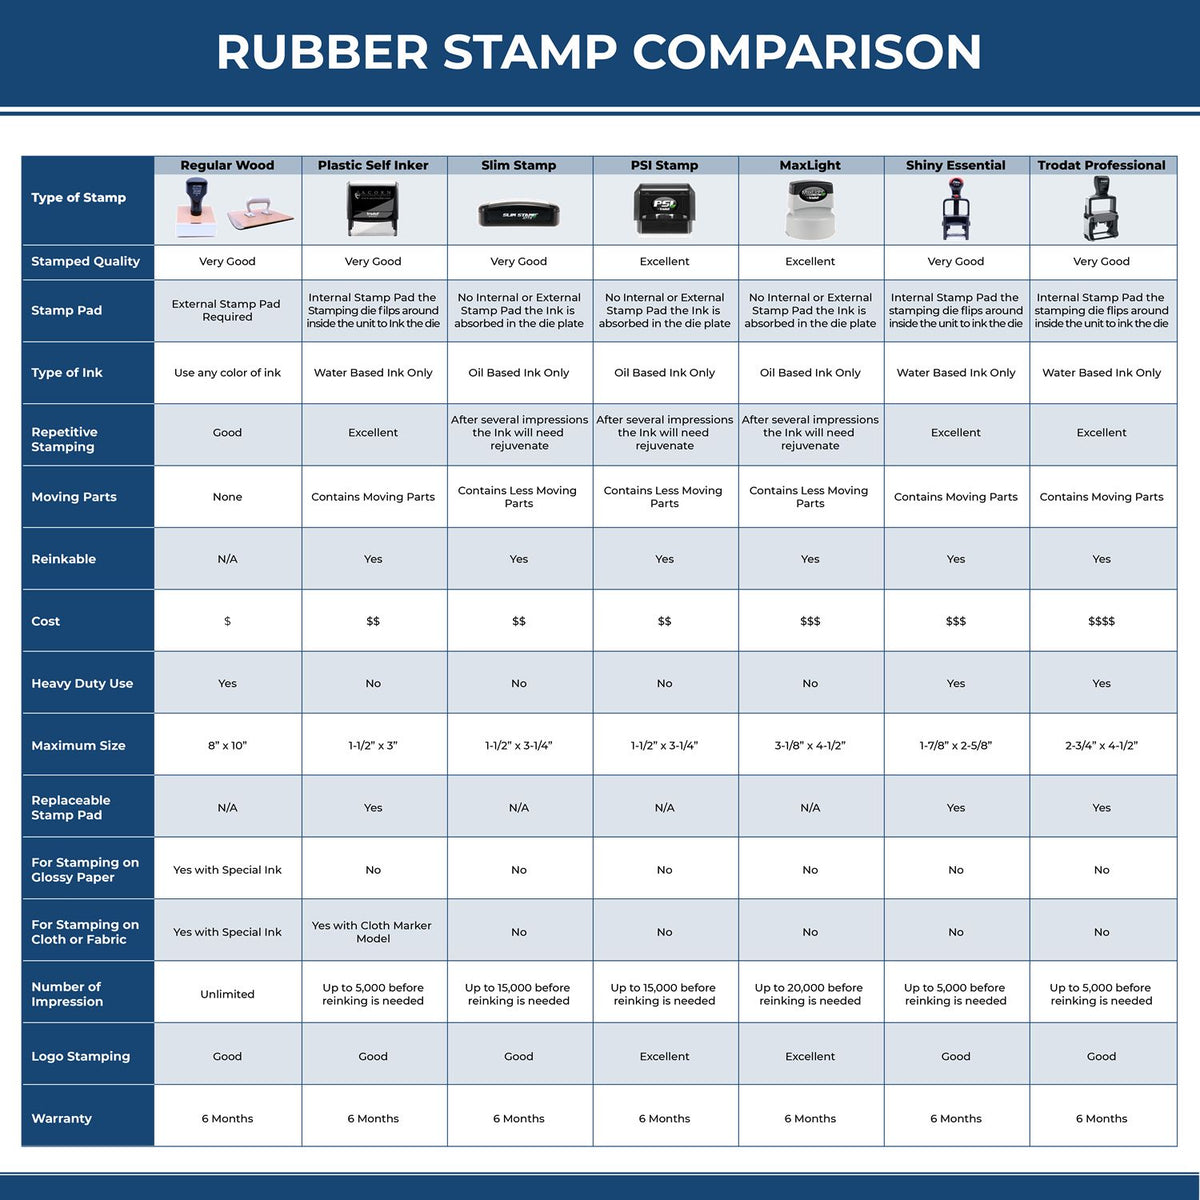 Large Self Inking Credit Cards Stamp 4567S Rubber Stamp Comparison